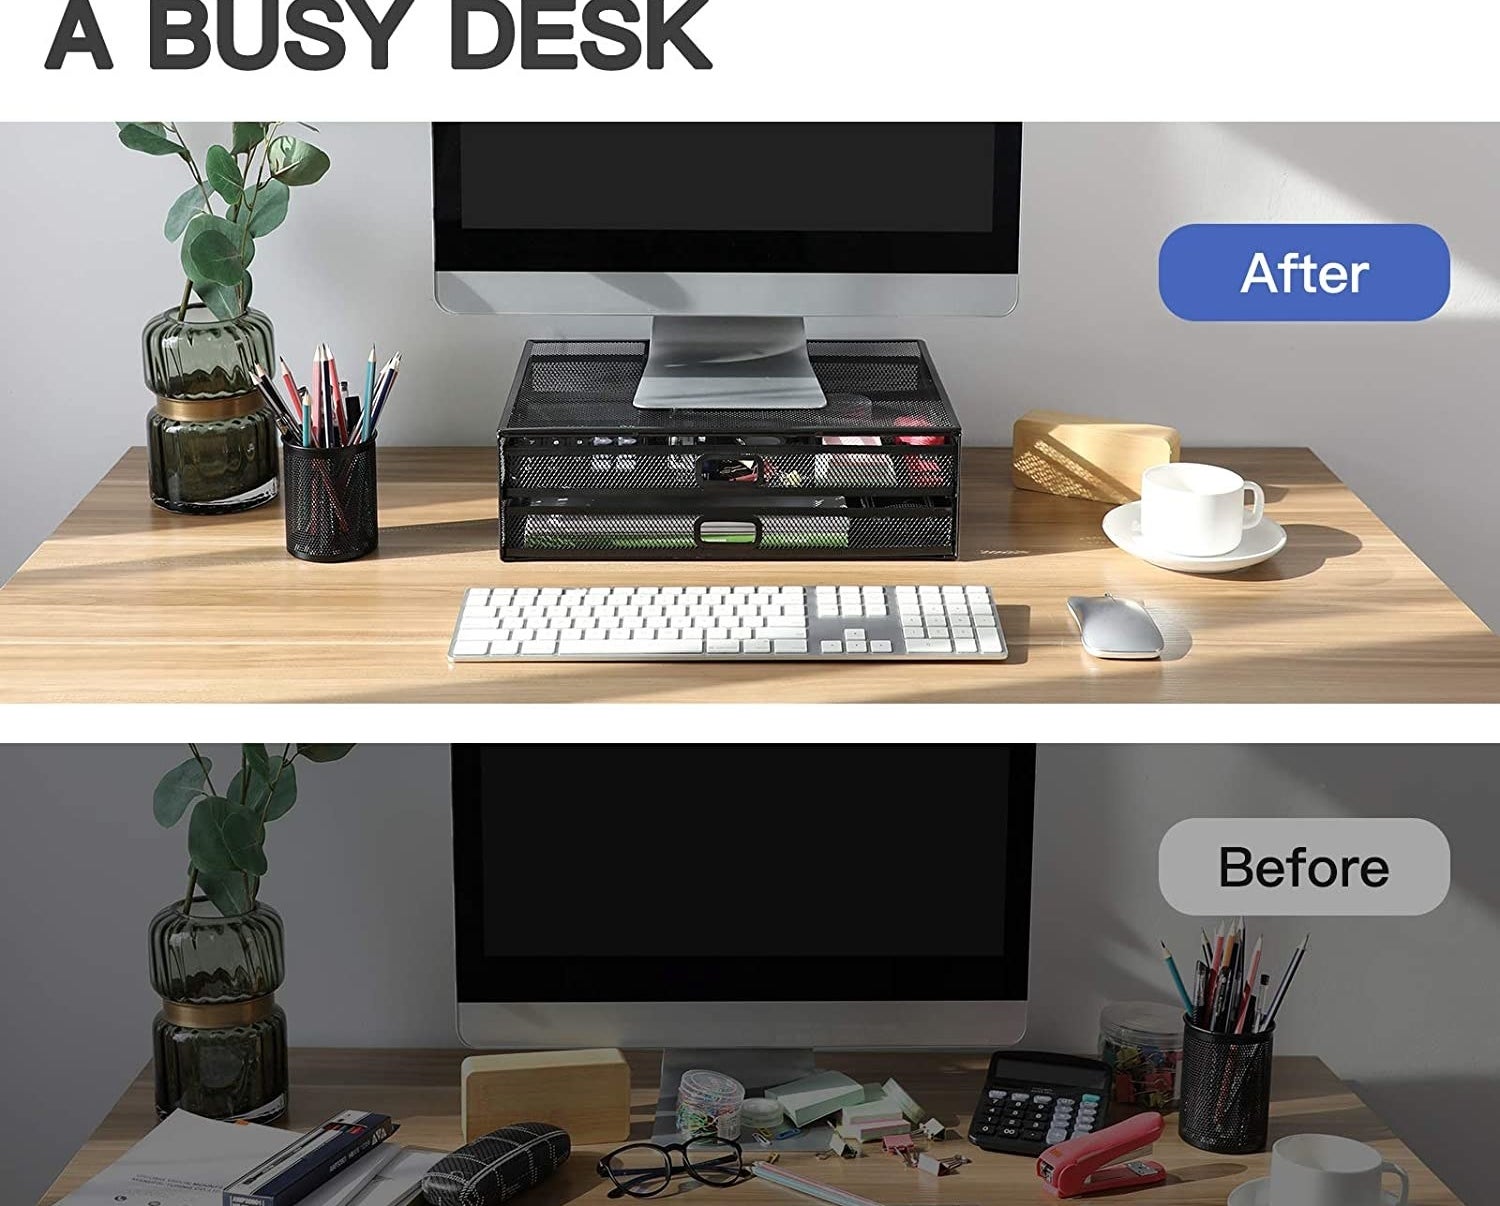 A before and after image should a desk cluttered with objects and then look super neat with the monitor riser